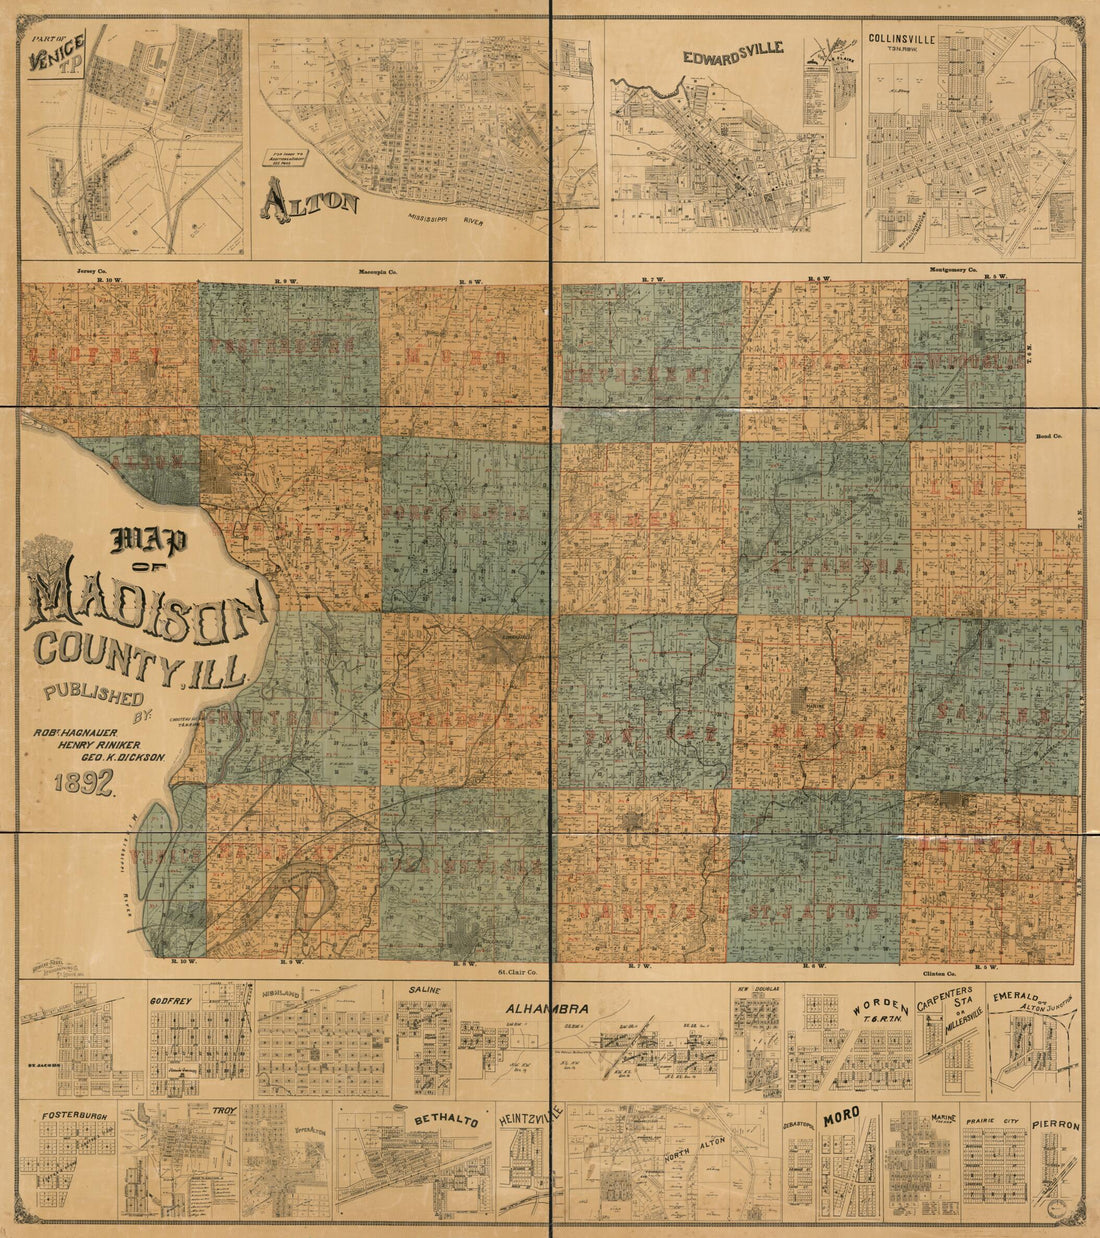 This old map of Map of Madison County, Ill from 1892 was created by Robt Hagnauer in 1892